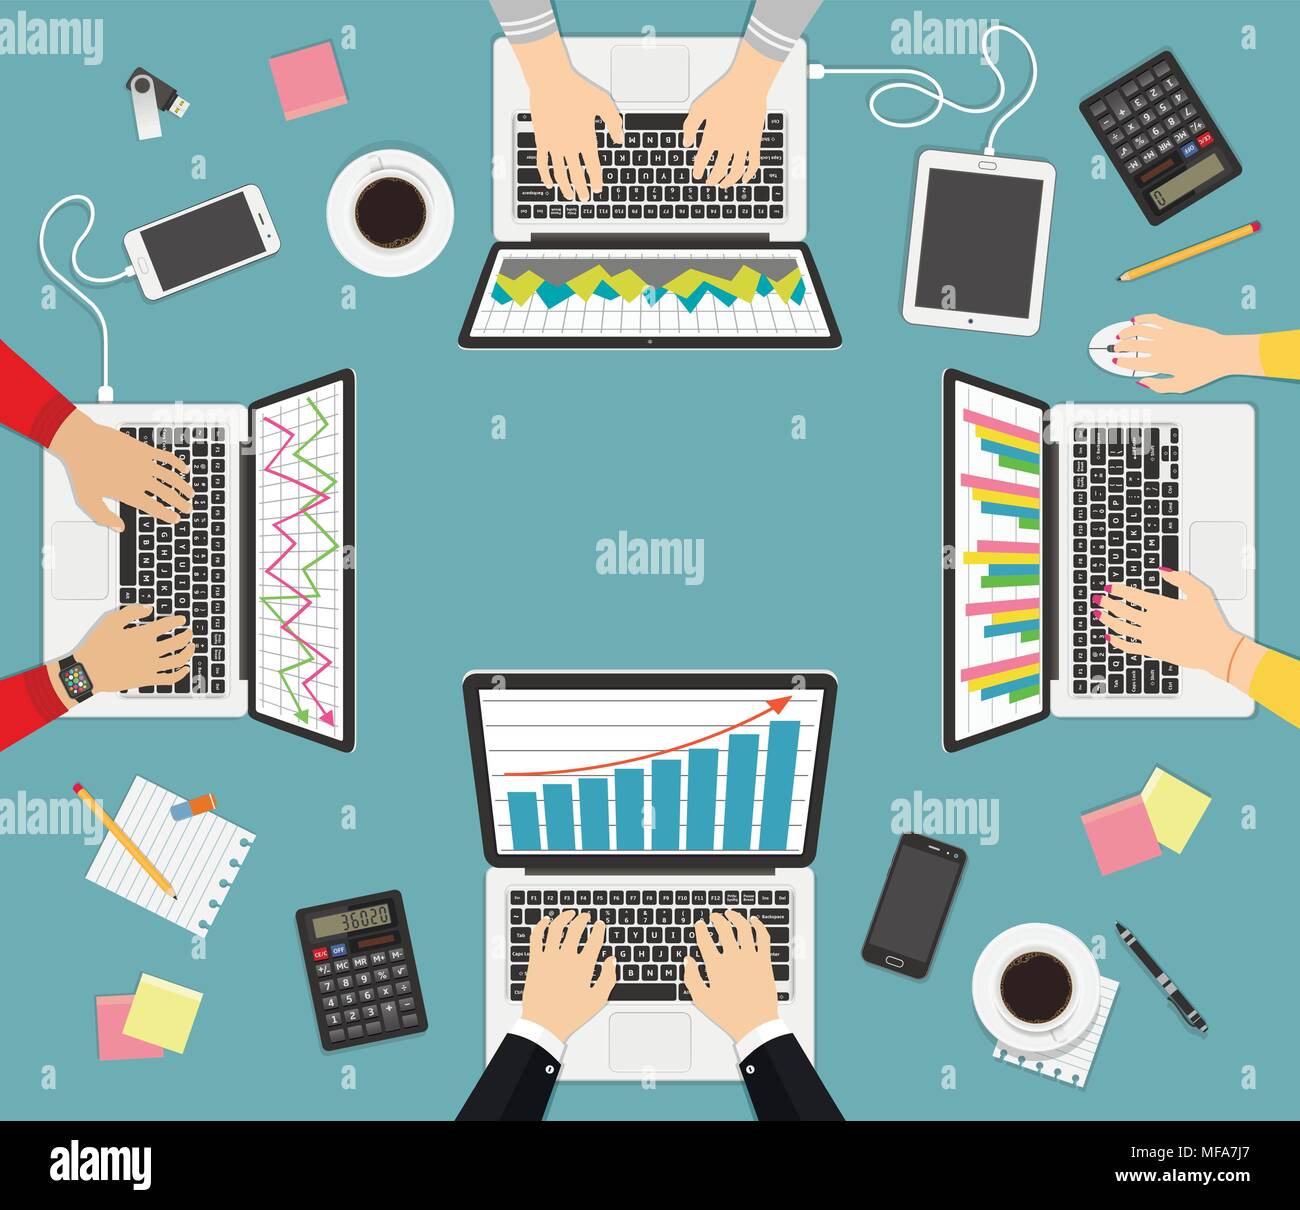 Teamwork, brainstorming concept. Business analytics. Group of businessman working on laptops, top view. Flat design vector illustration. Stock Vector